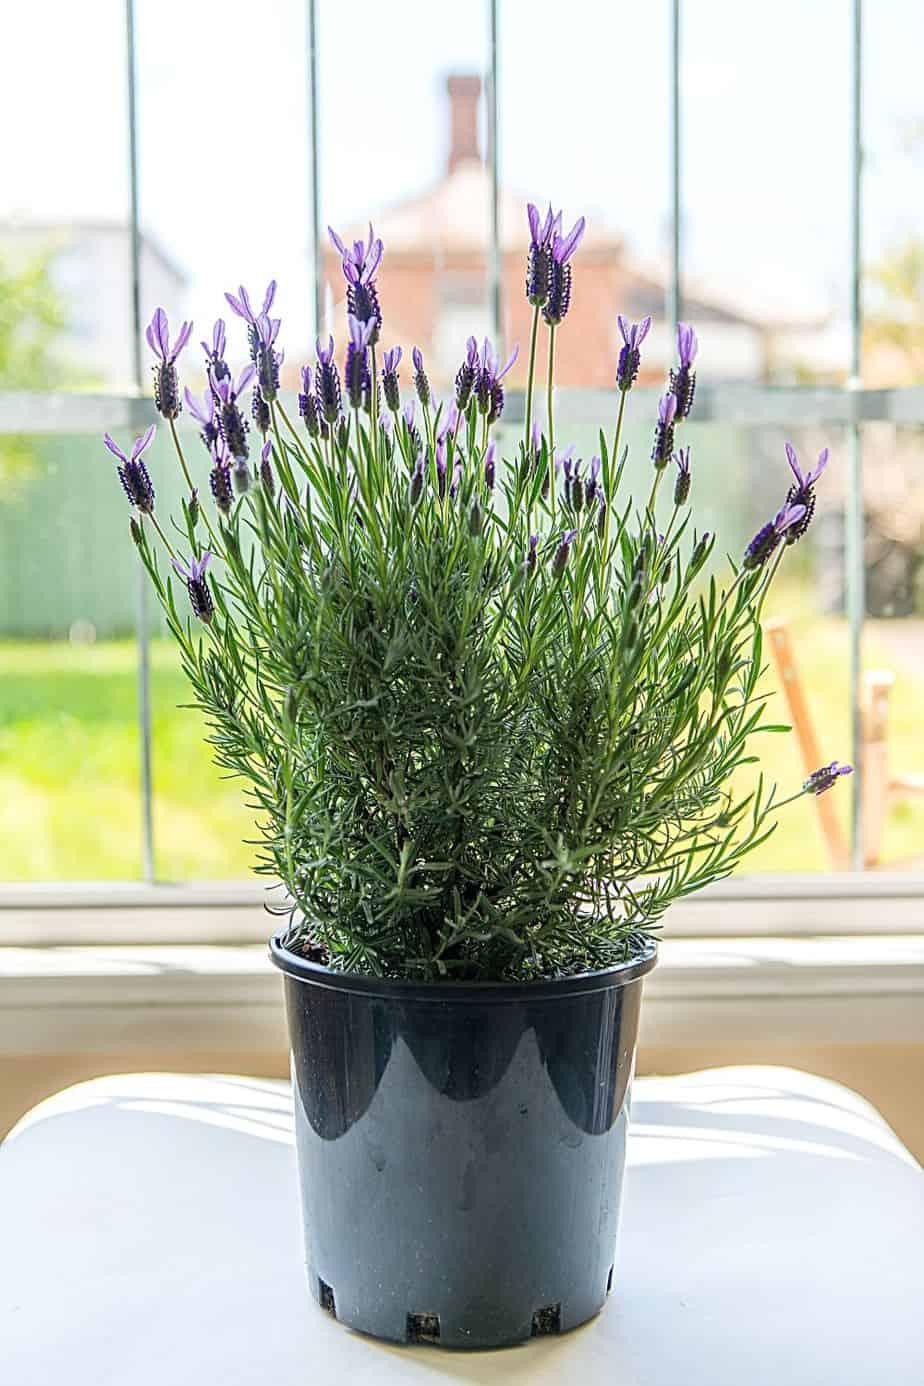 If you have a southwest-facing window in your room, you better place a Lavender Plant there to help you relax